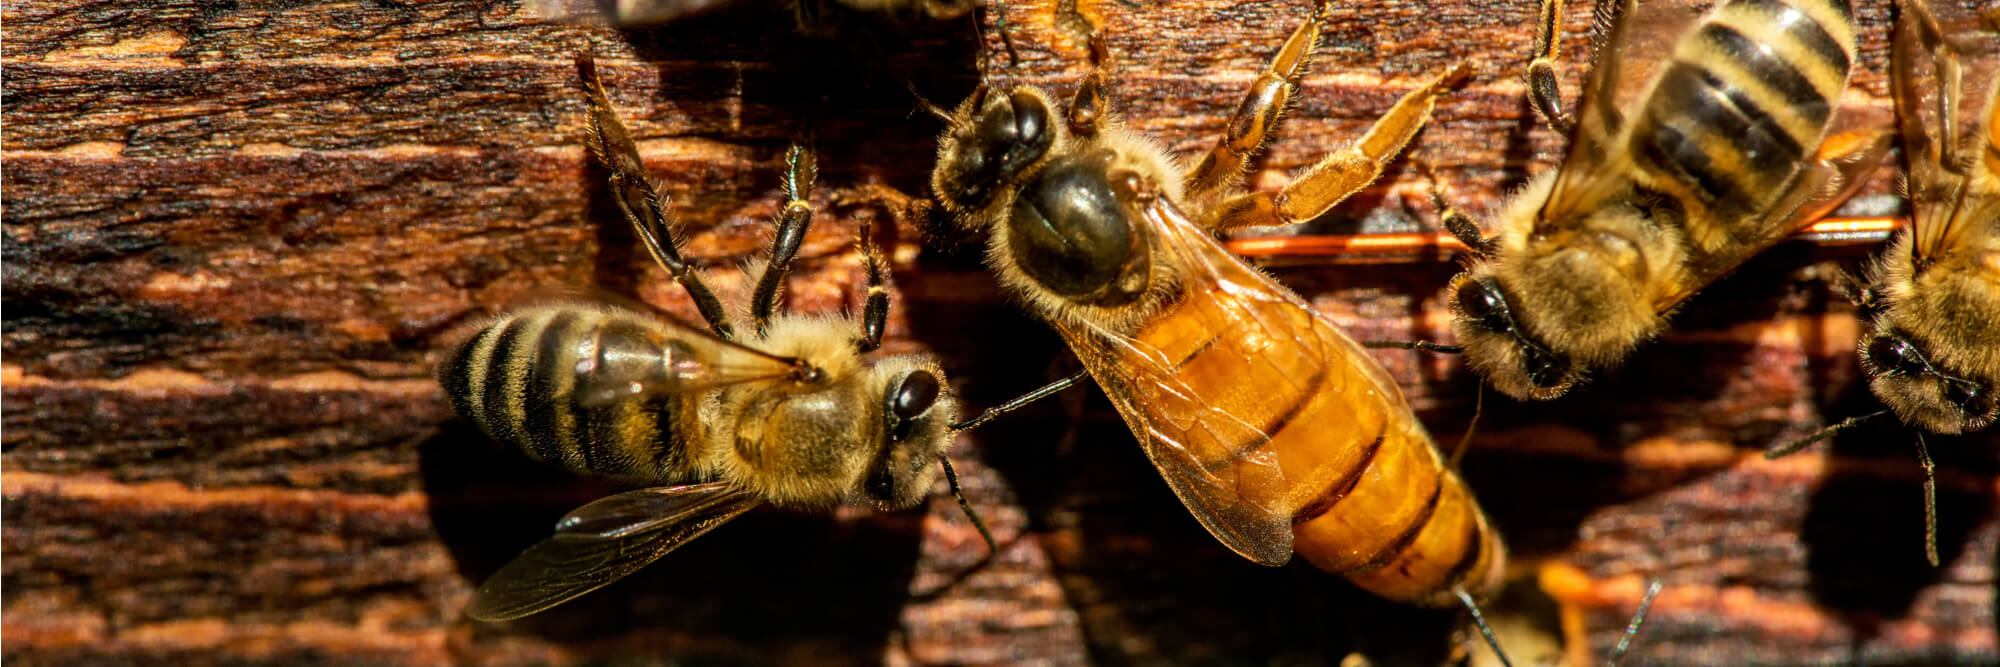 Queens and Workers showing differences in Honey Bee Biology